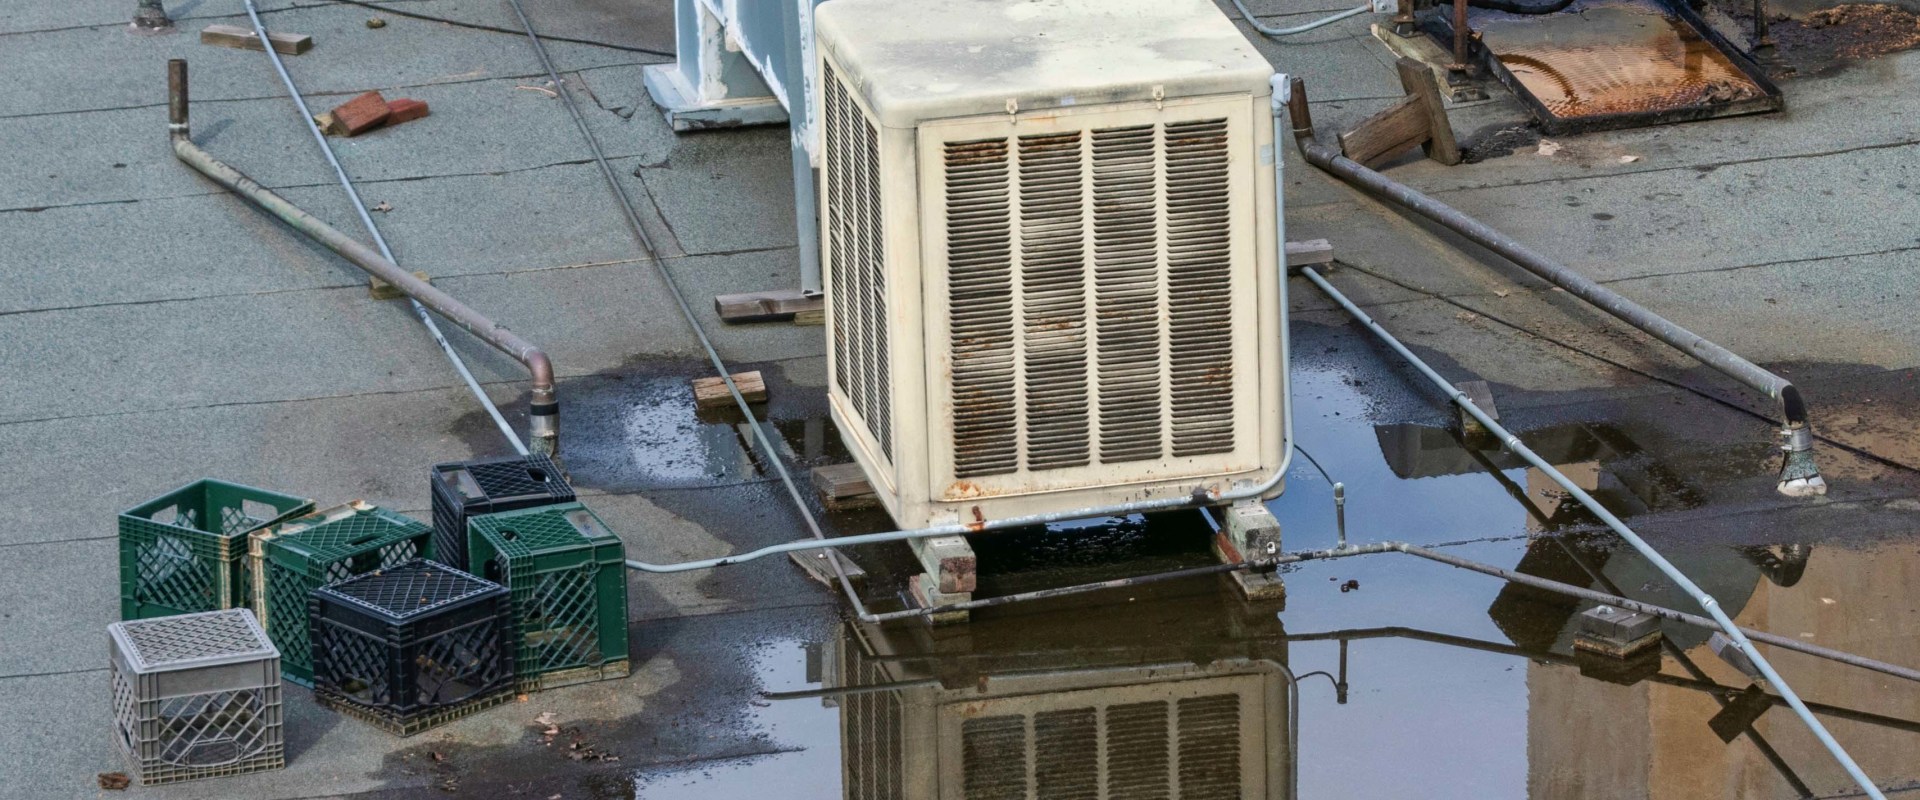 Can Water Damage an AC Compressor? - An Expert's Perspective